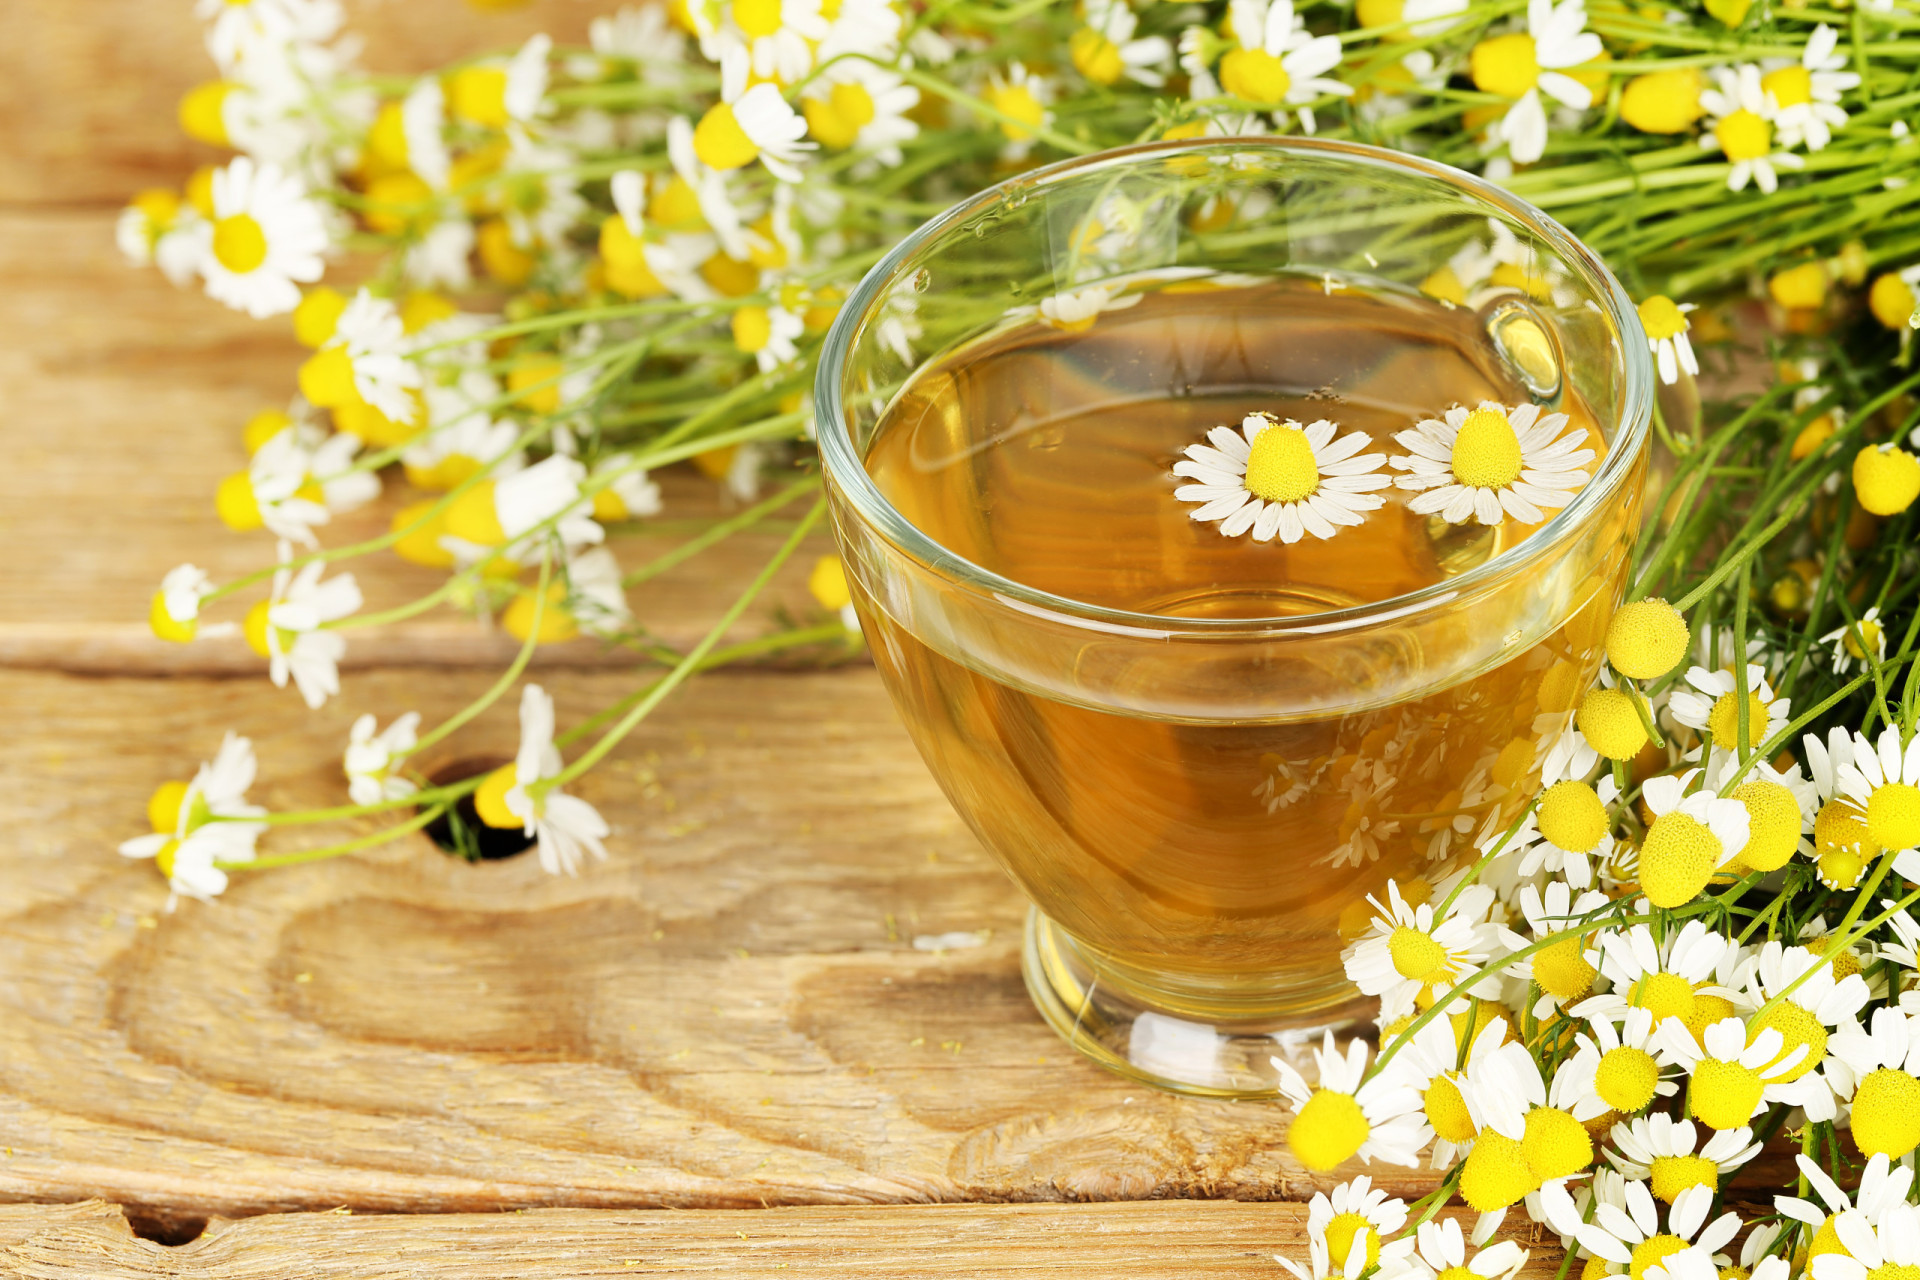 <p>Chamomile (<em>matricaria recutit</em>) may potentiate the effects of warfarin and cause bleeding.</p><p>You may also like:<a href="https://www.starsinsider.com/n/168788?utm_source=msn.com&utm_medium=display&utm_campaign=referral_description&utm_content=556697en-en"> 30 beautiful and single Hollywood celebrities</a></p>